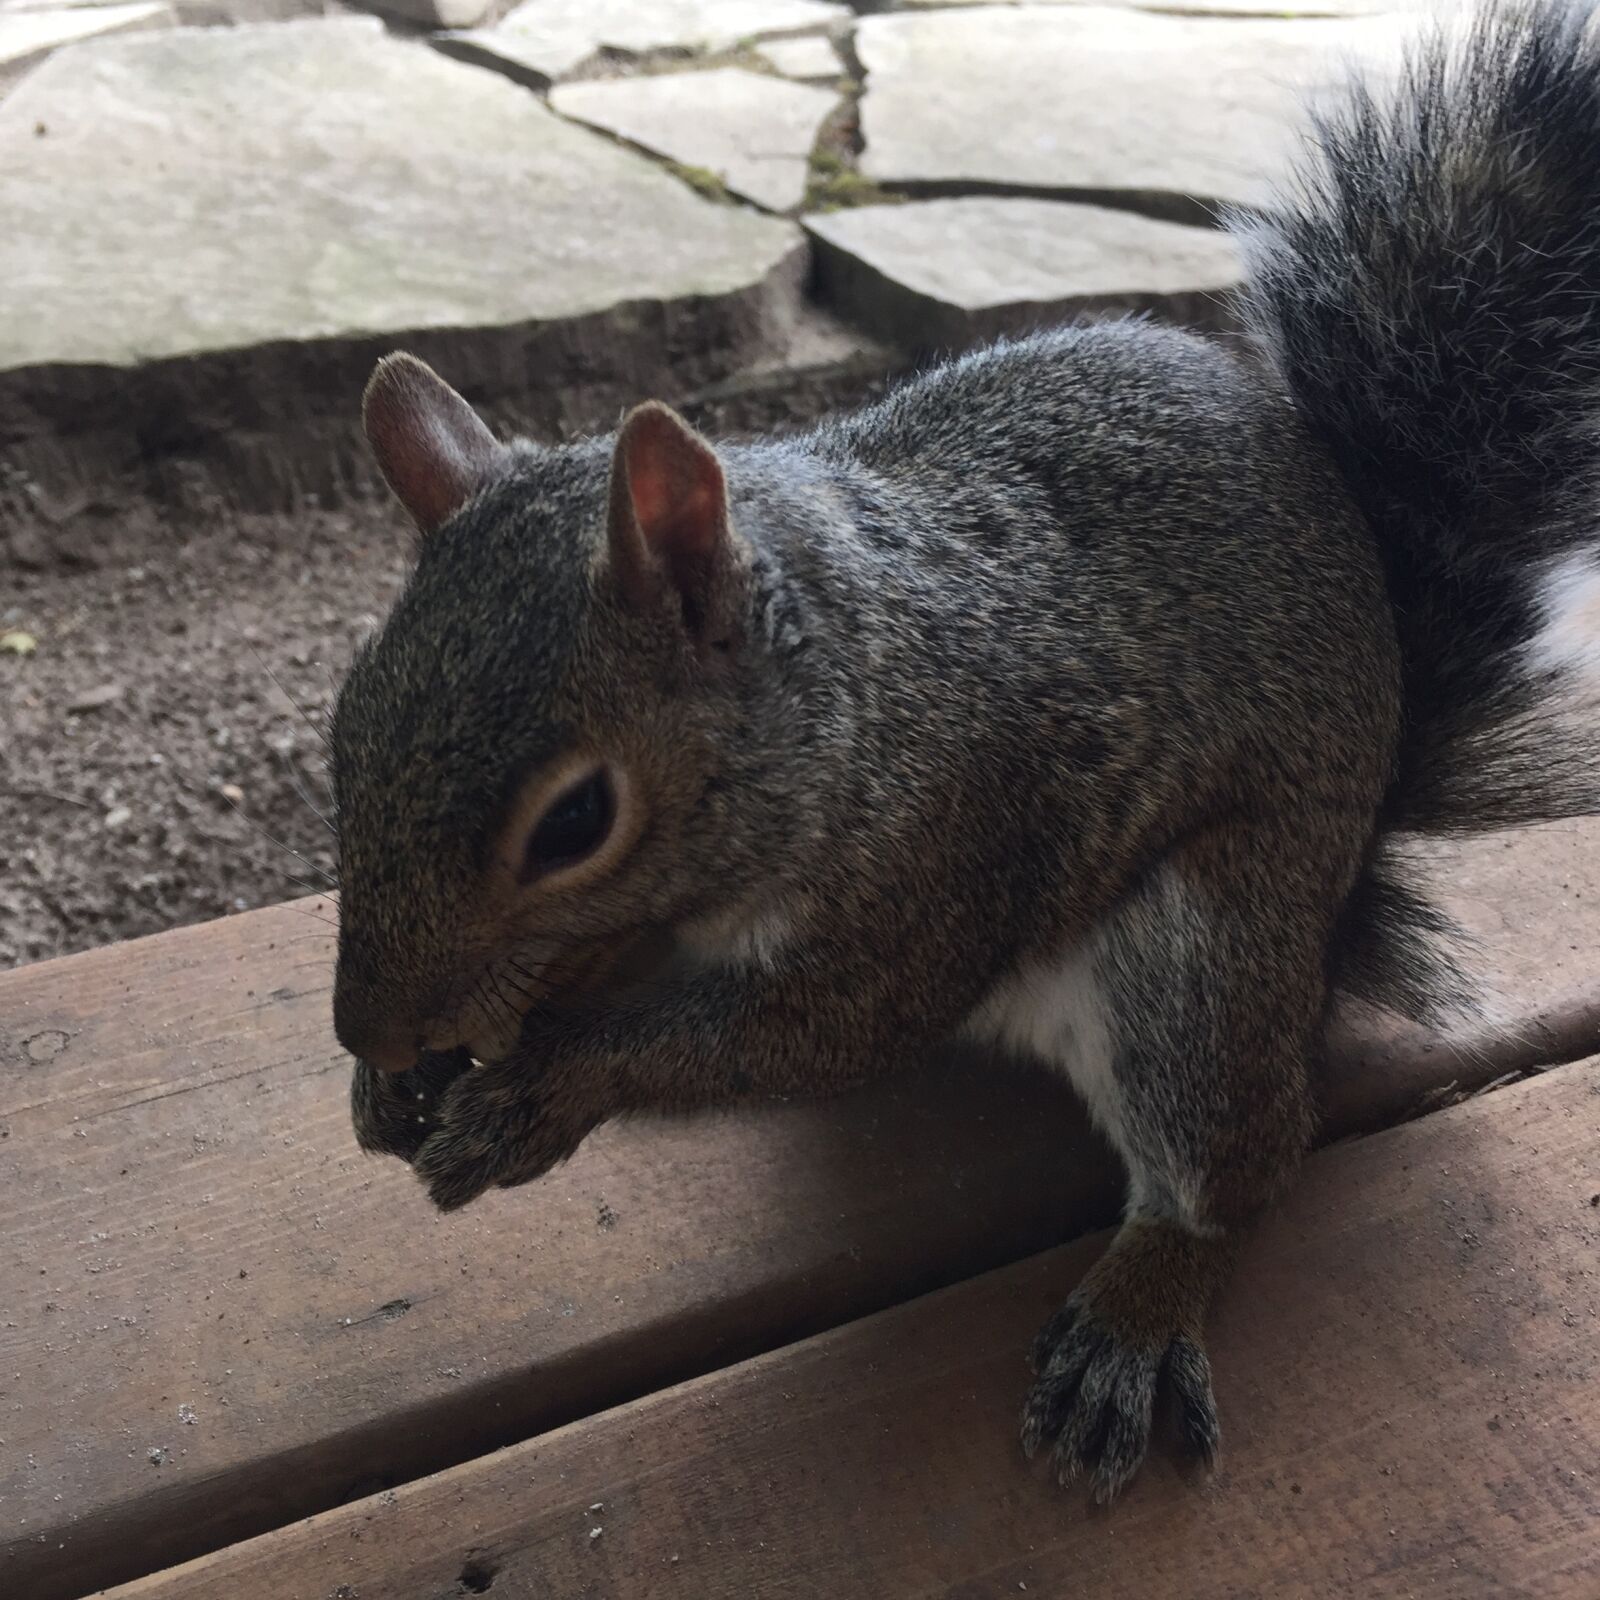 Apple iPhone 6 sample photo. Squirrel, critter, wildlife photography